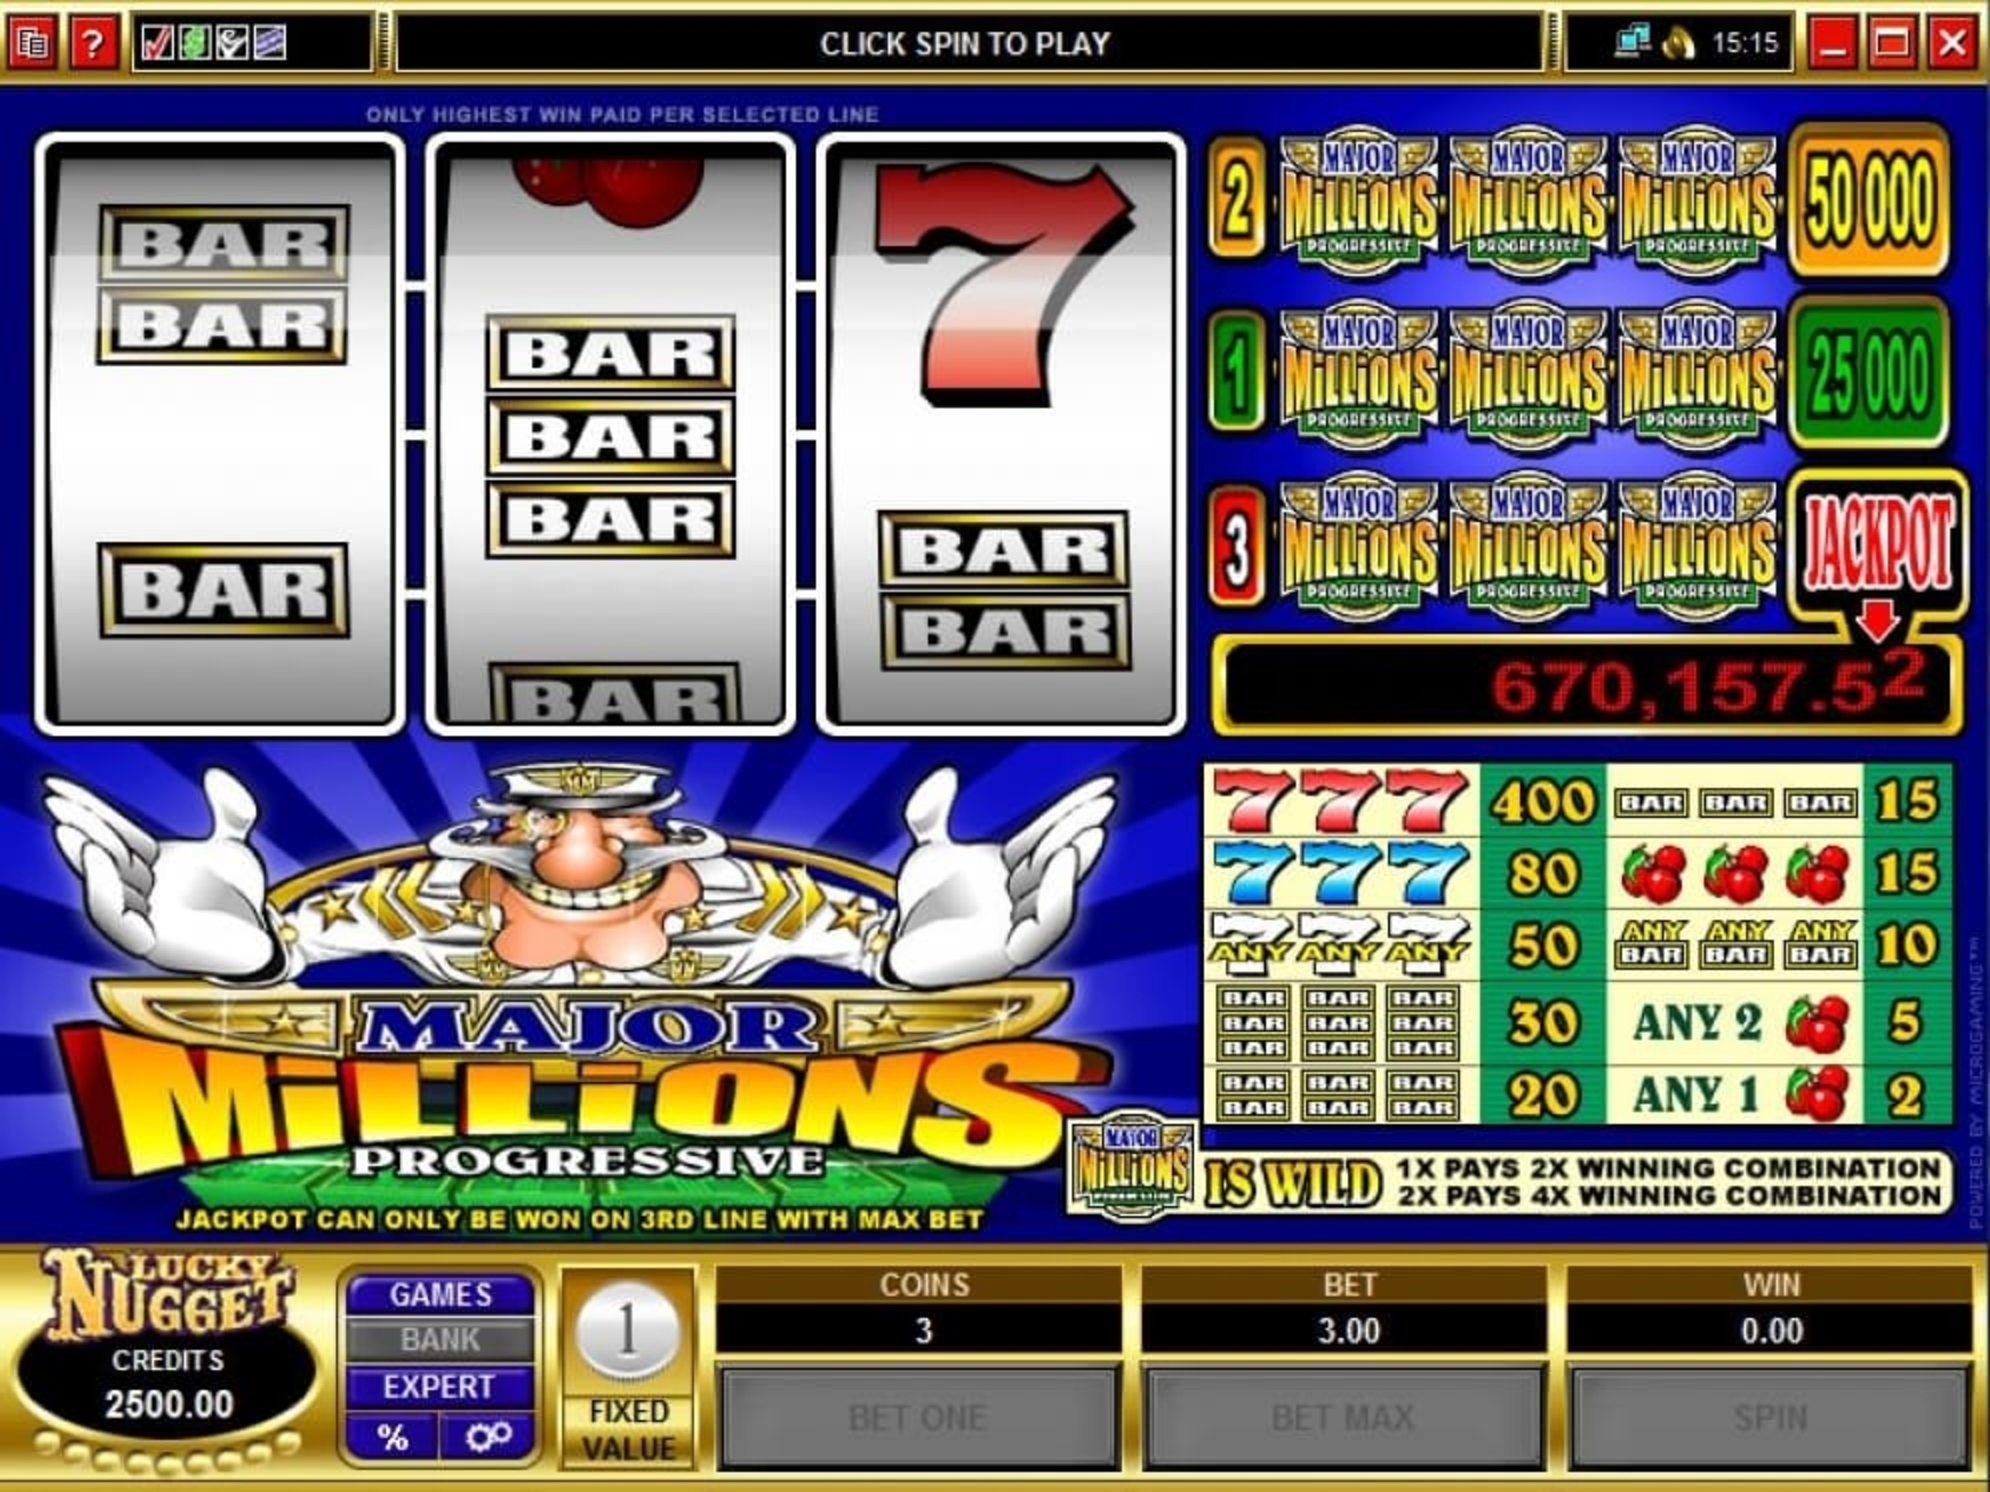 The Major Millions Online Slot Demo Game by Microgaming